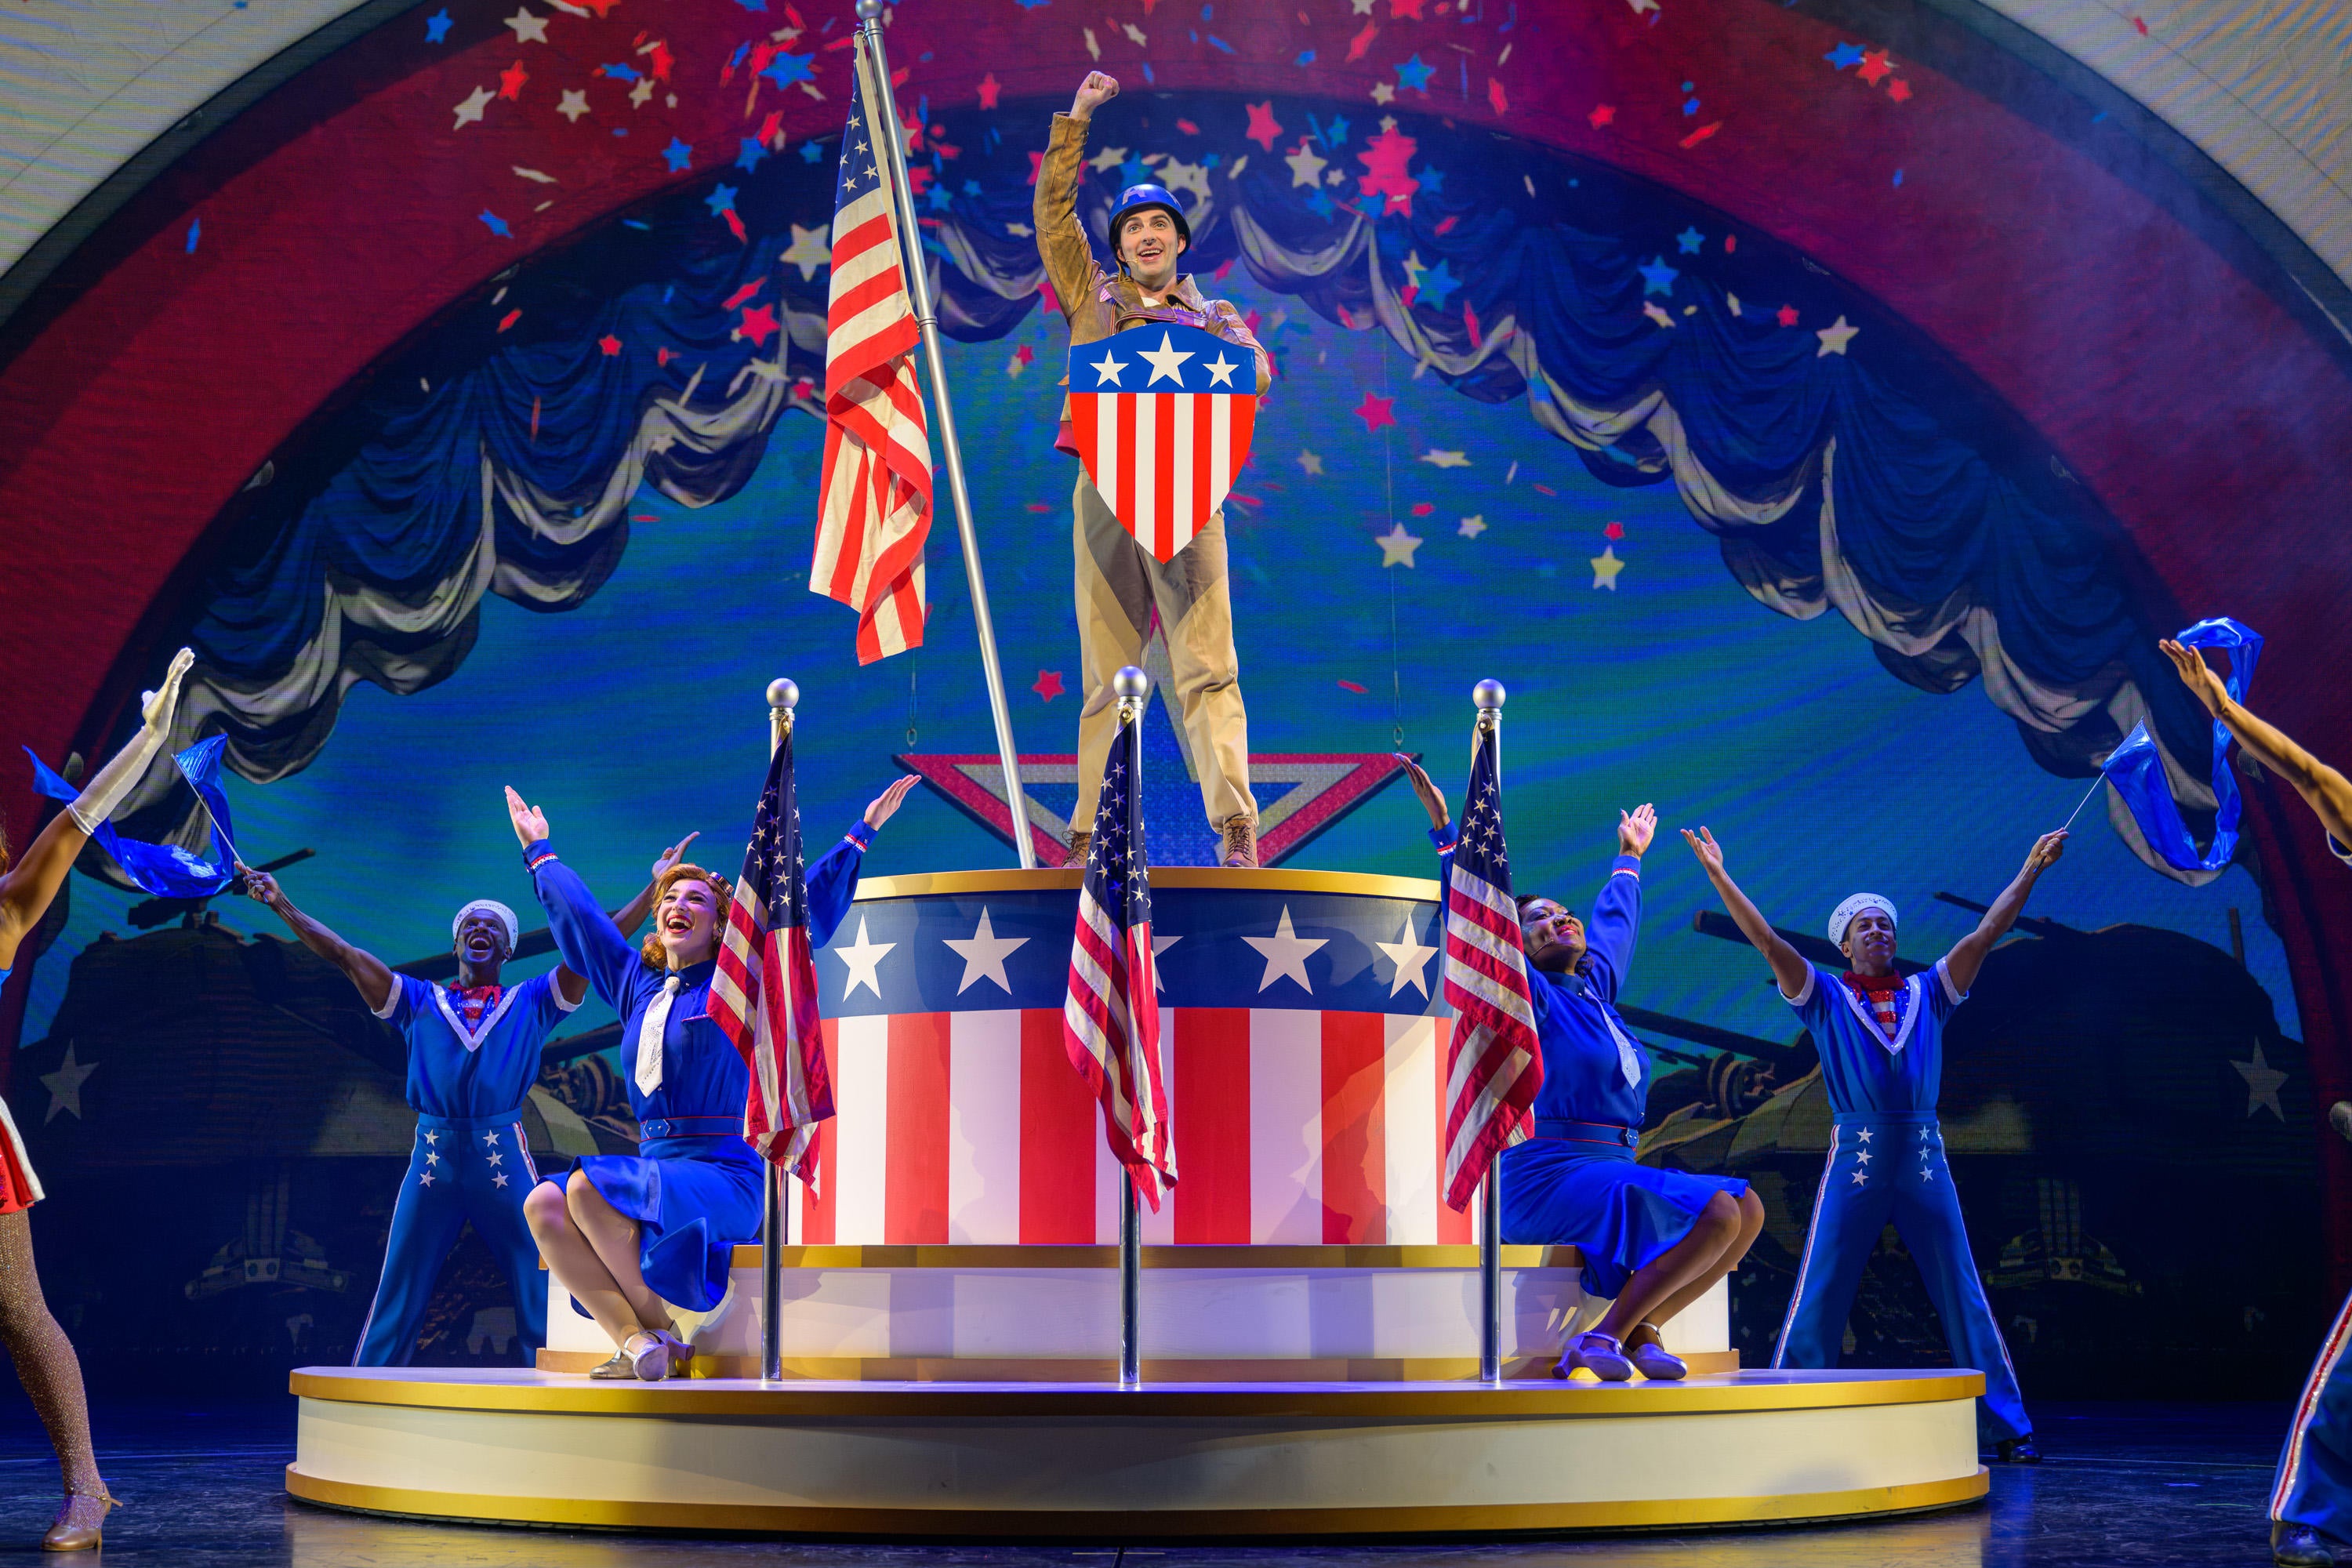 'Rogers: The Musical' Live Theater Show at Disneyland Resort - 'Star Spangled Man'